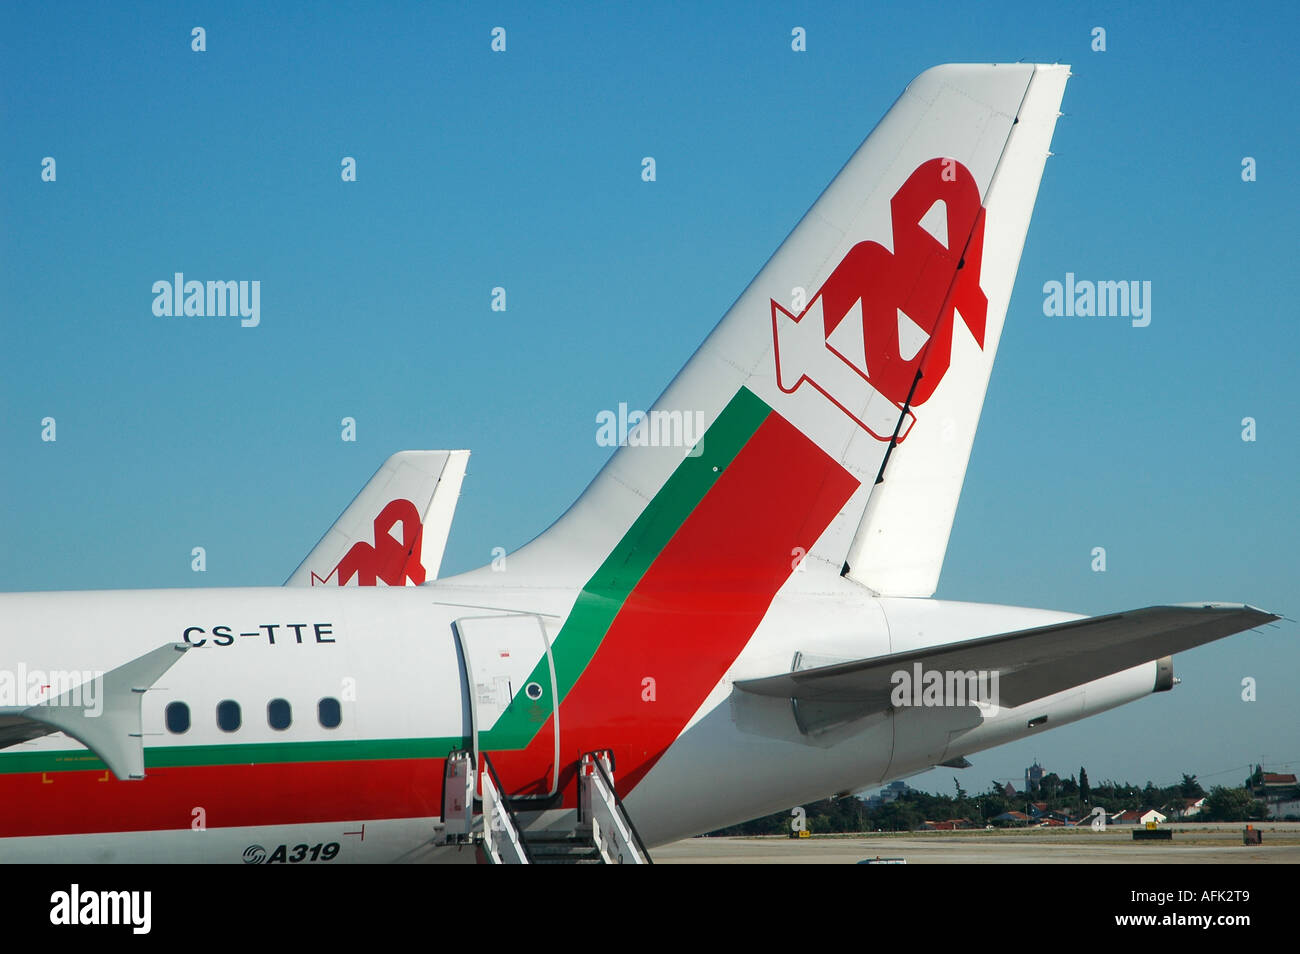 Tail planes of Airbus A319-111 TAP flag carrier airline of Portugal at Lisbon airport Portugal Stock Photo